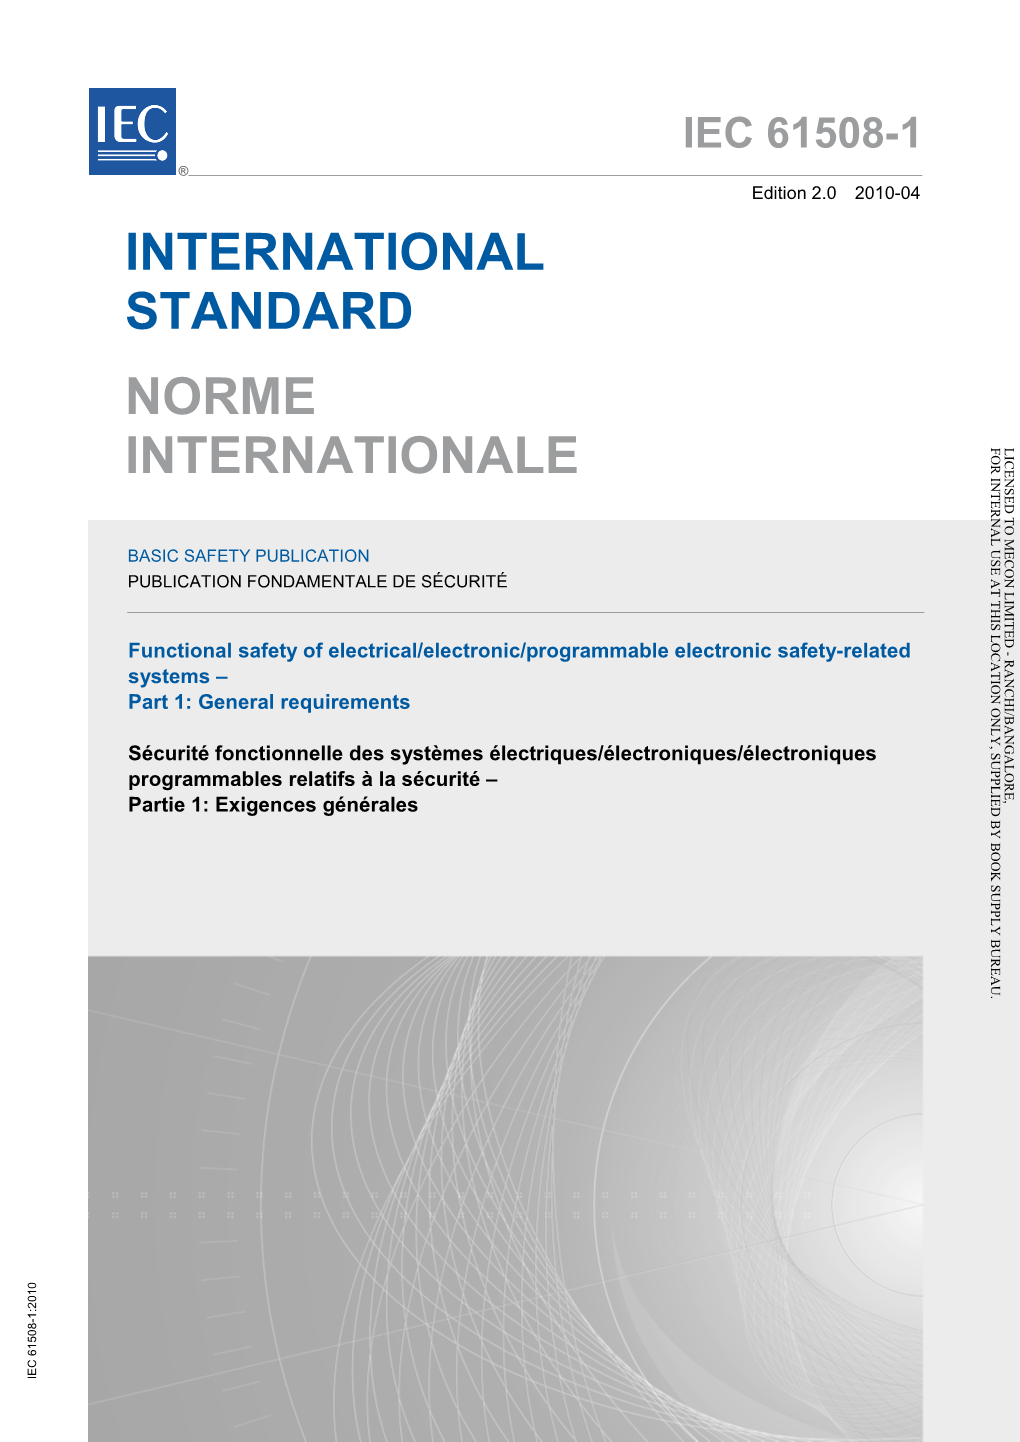 IEC 61508-1 ® Edition 2.0 2010-04 INTERNATIONAL STANDARD NORME INTERNATIONALE for INTERNAL USE at THIS LOCATION ONLY, SUPPLIED by BOOK SUPPLY BUREAU